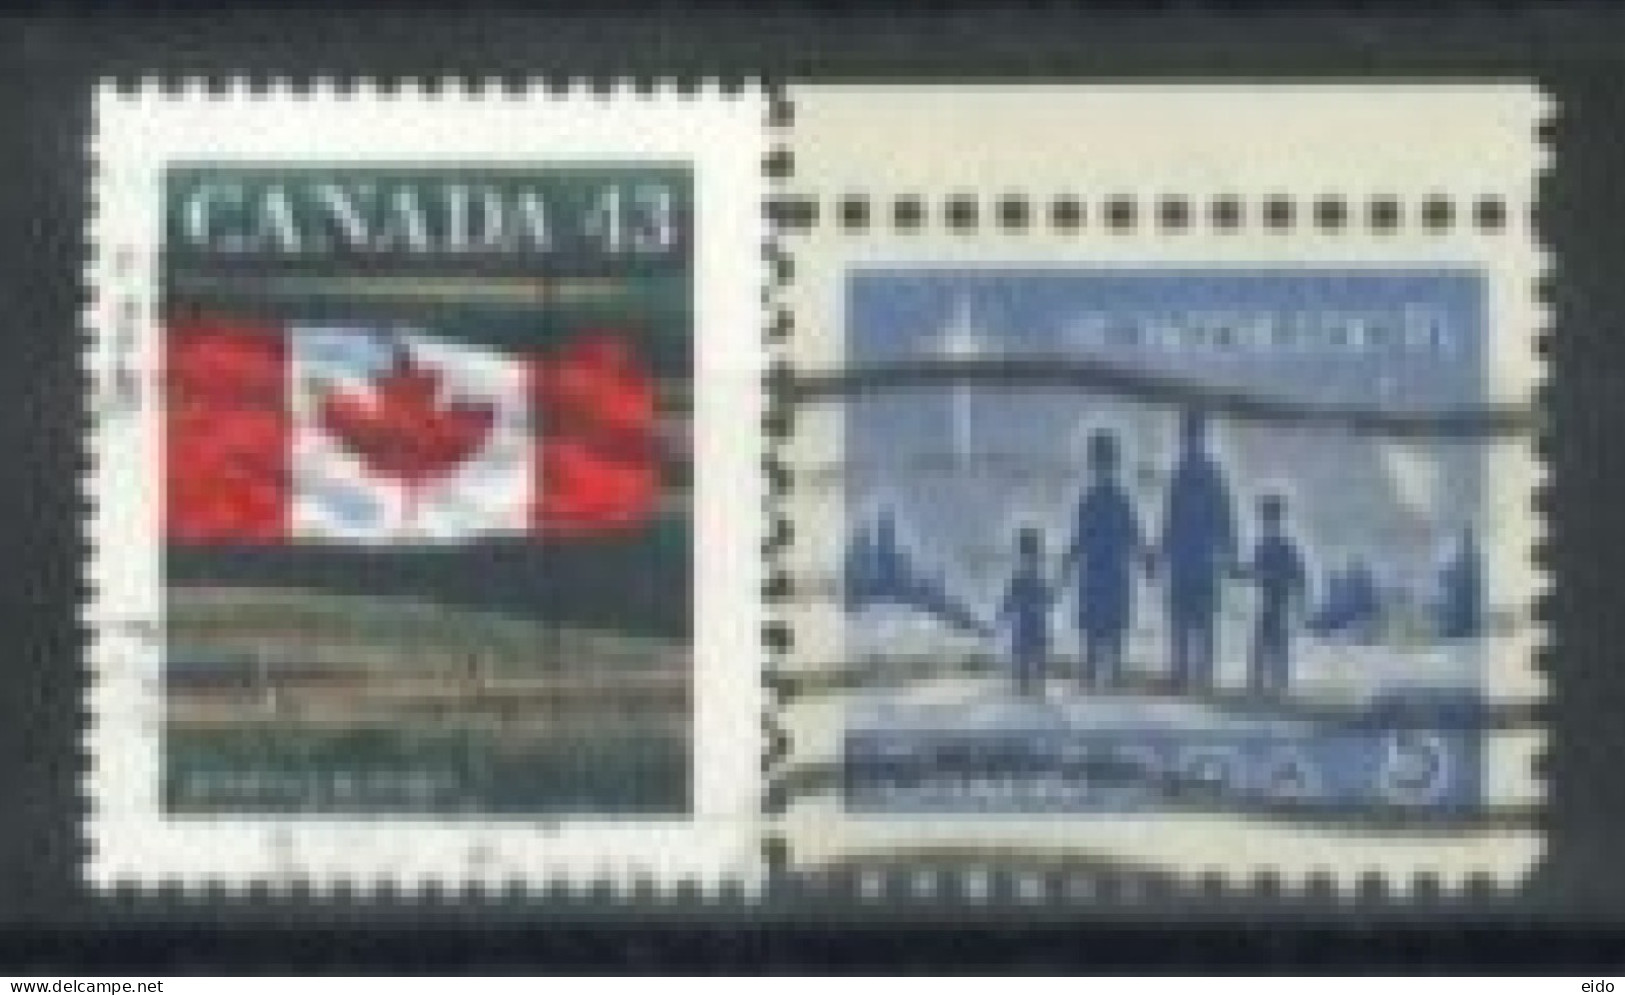 CANADA - STAMPS SET OF 2, USED. - Used Stamps